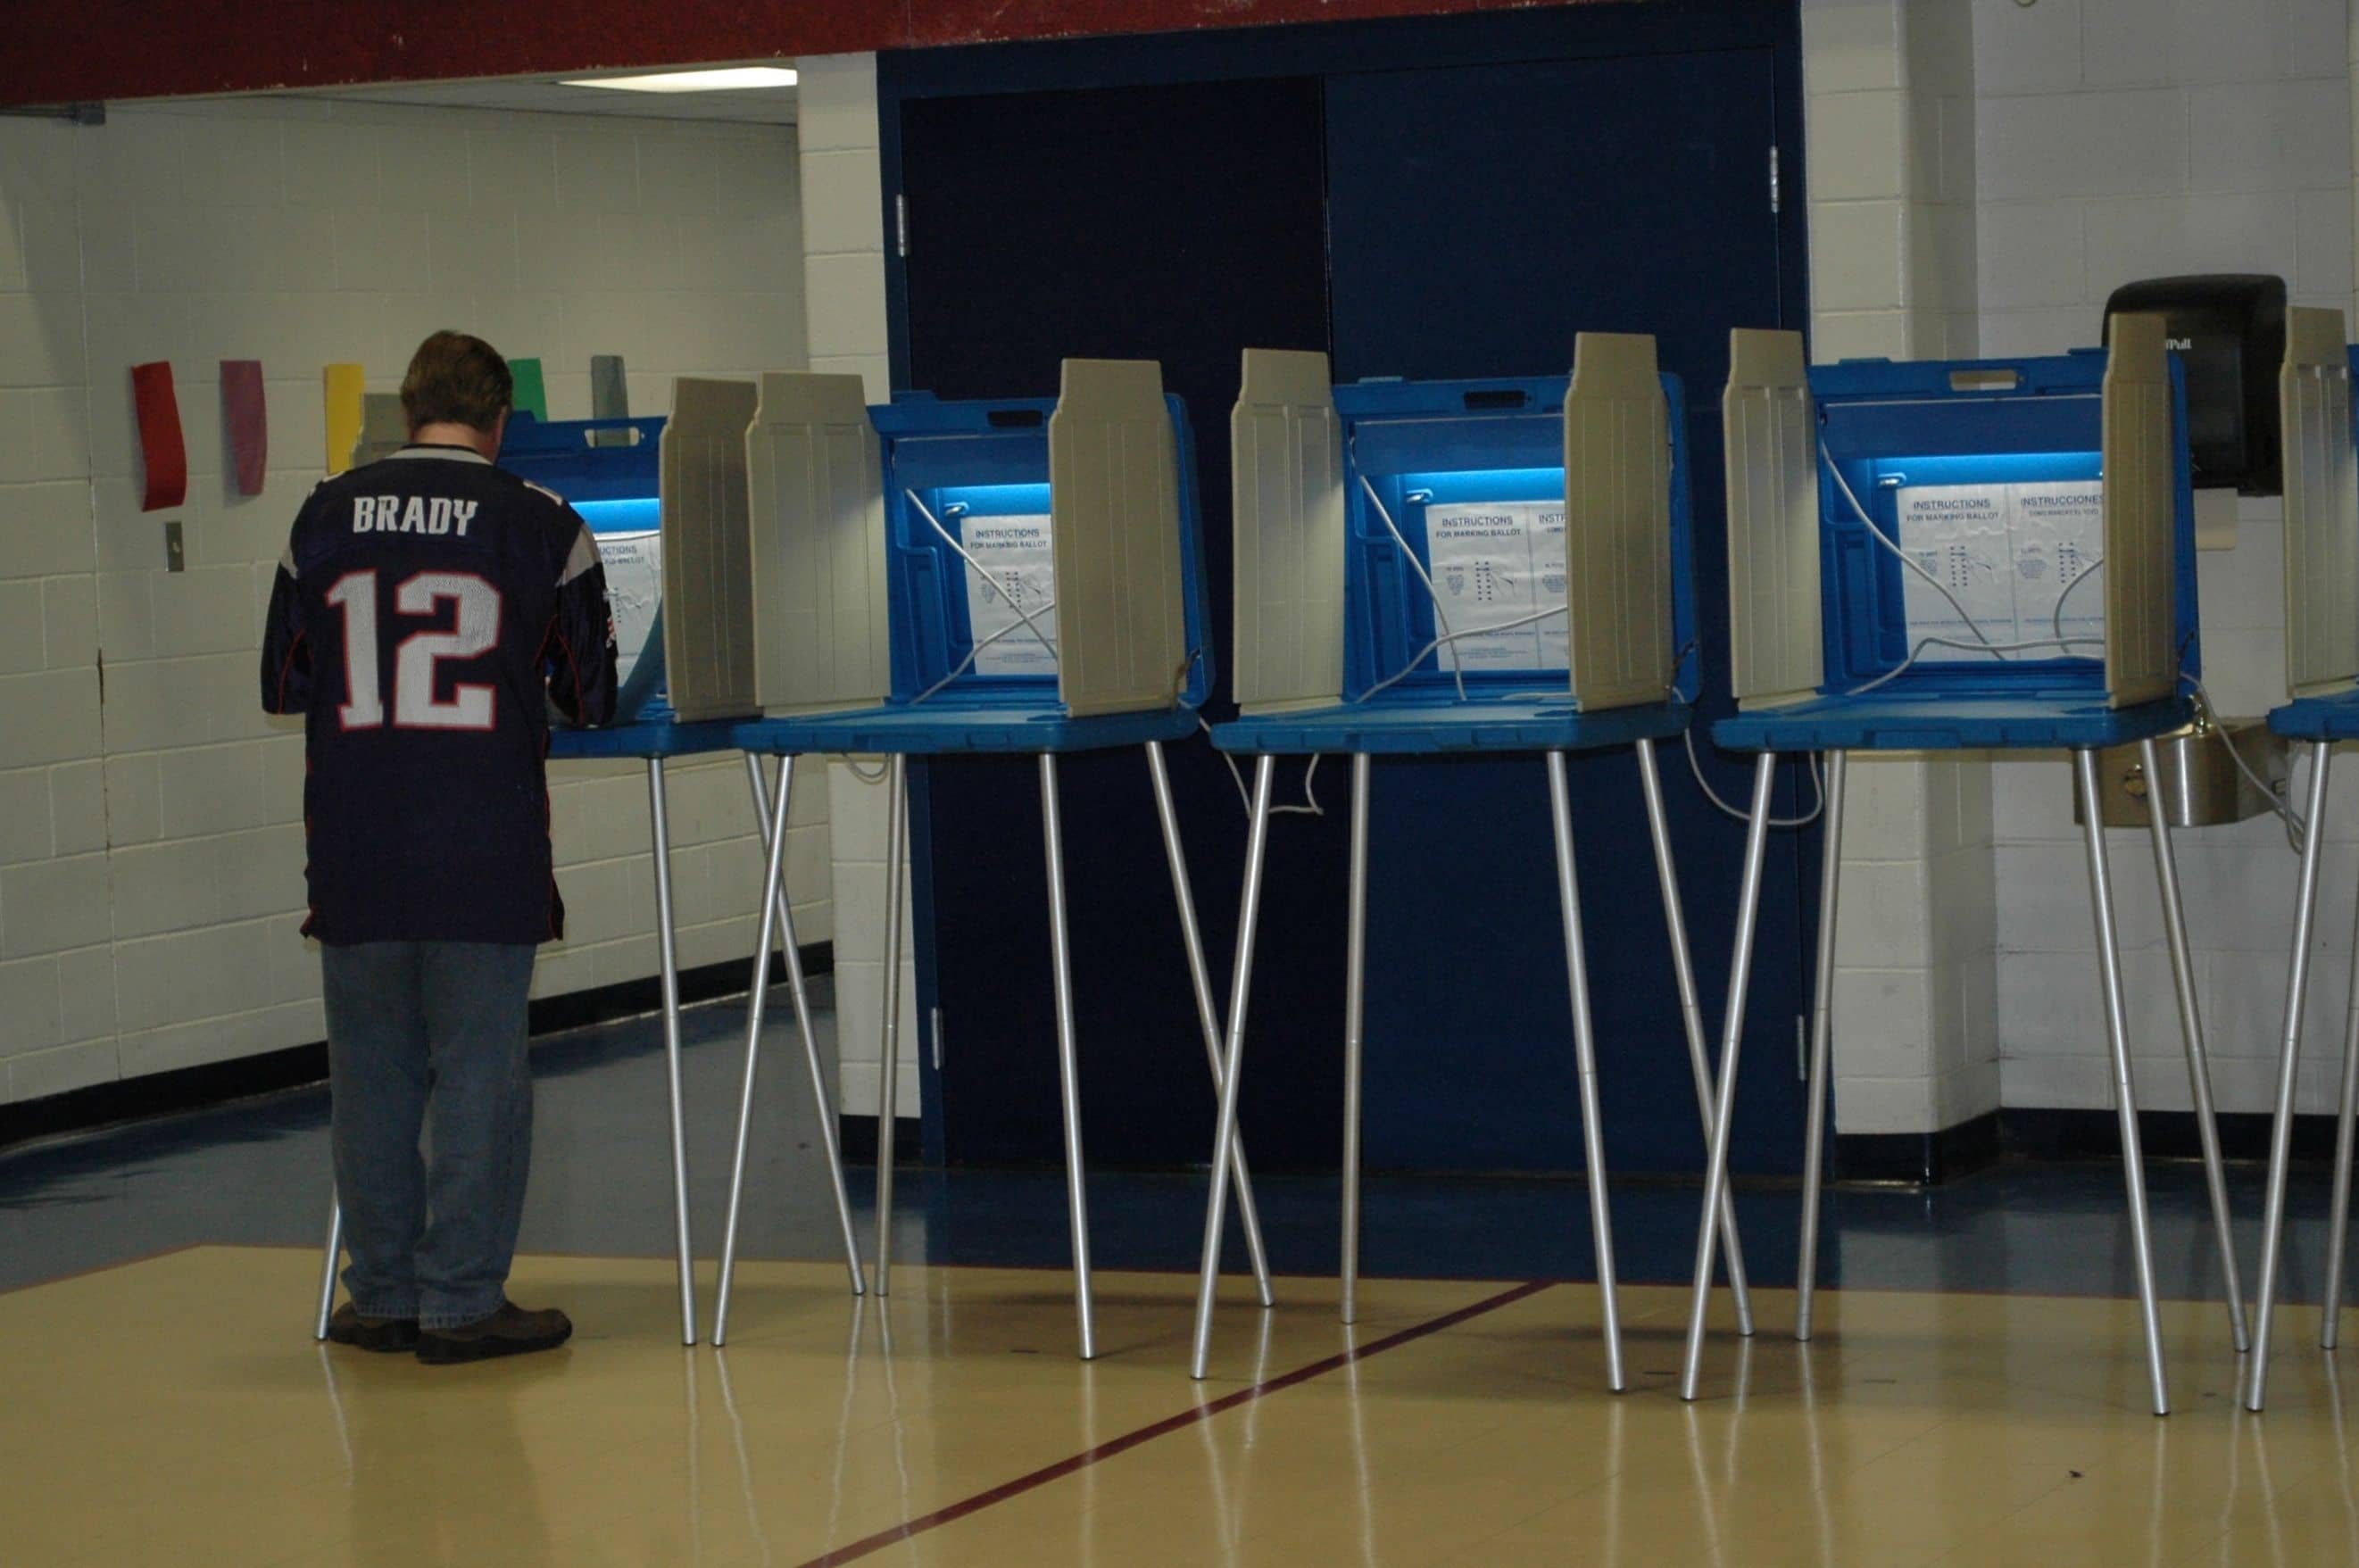 A voter makes his choices during the 2014 primary. The 2018 election is Tuesday, Nov. 6.